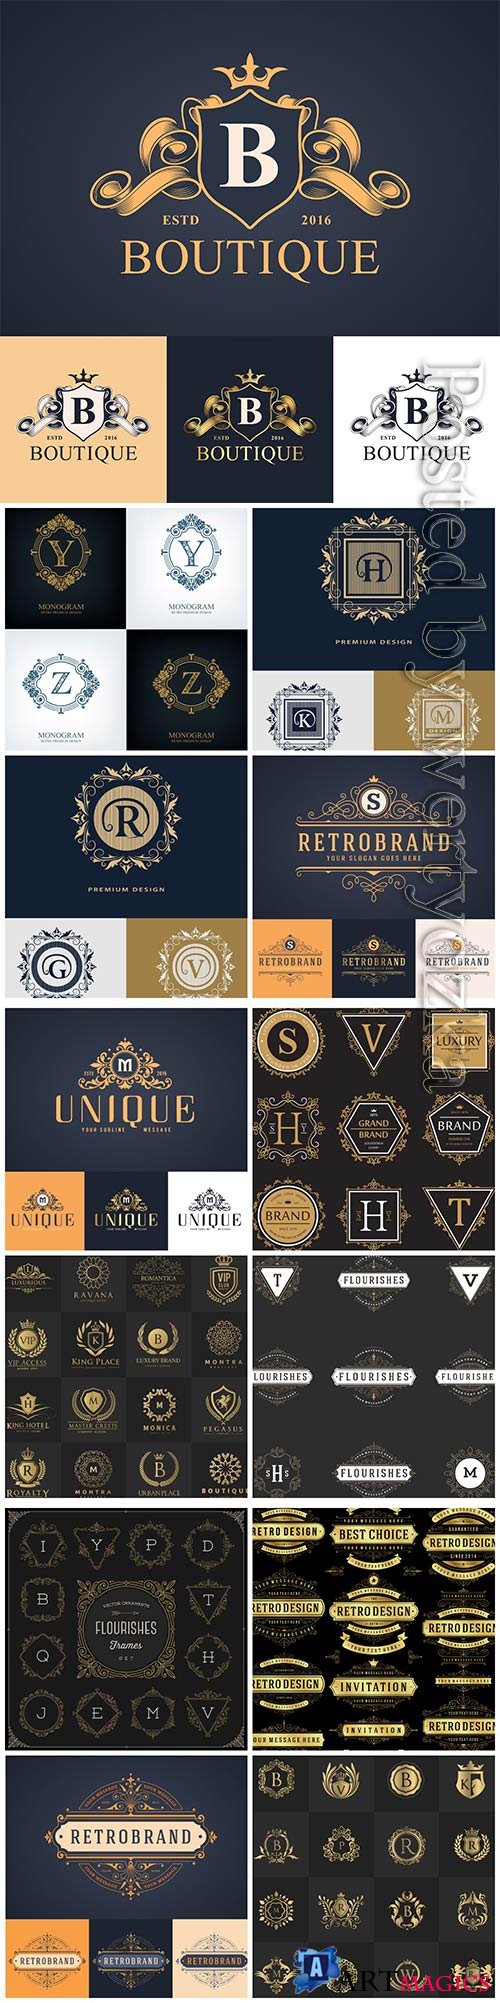 Logos, badges and design elements in vector